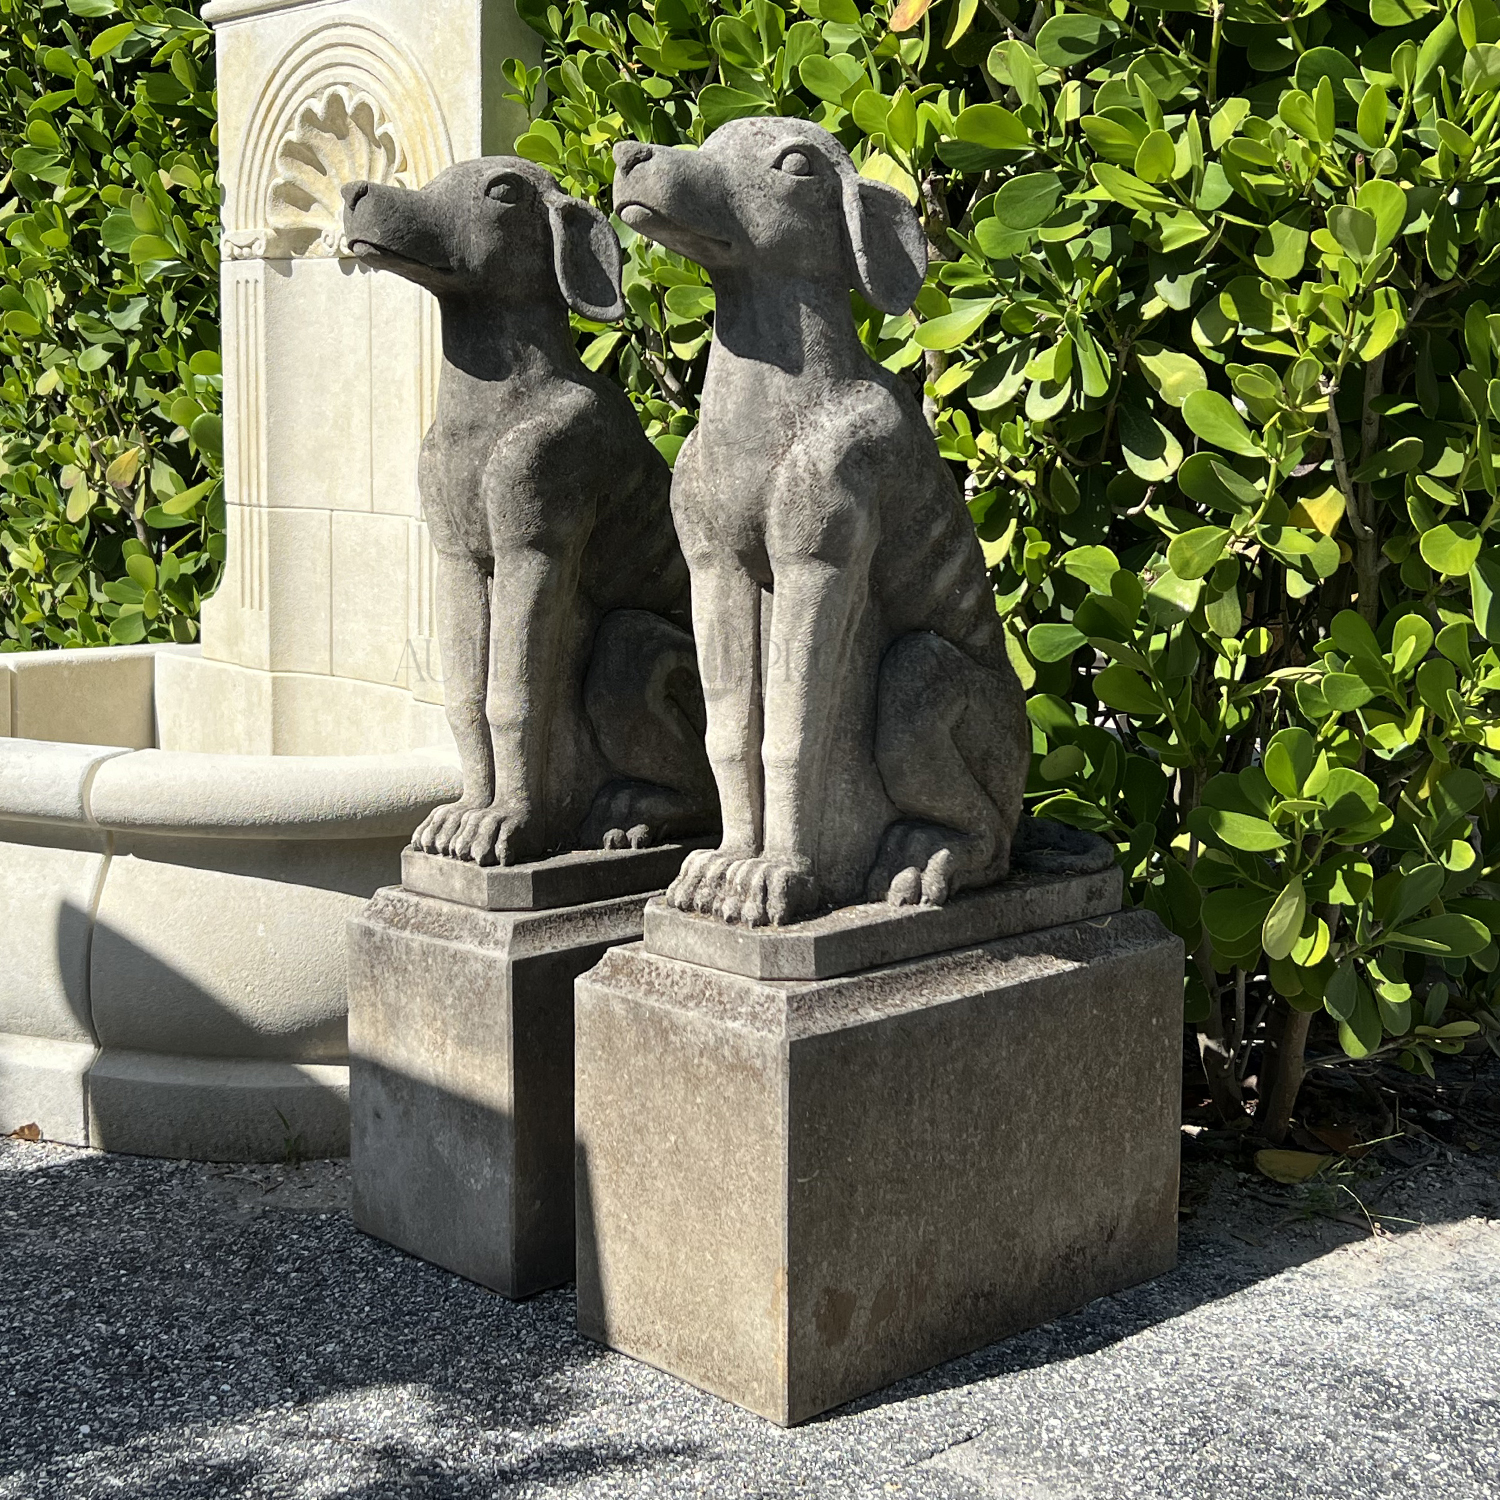 Pair of Tuscan Greyhound Statues